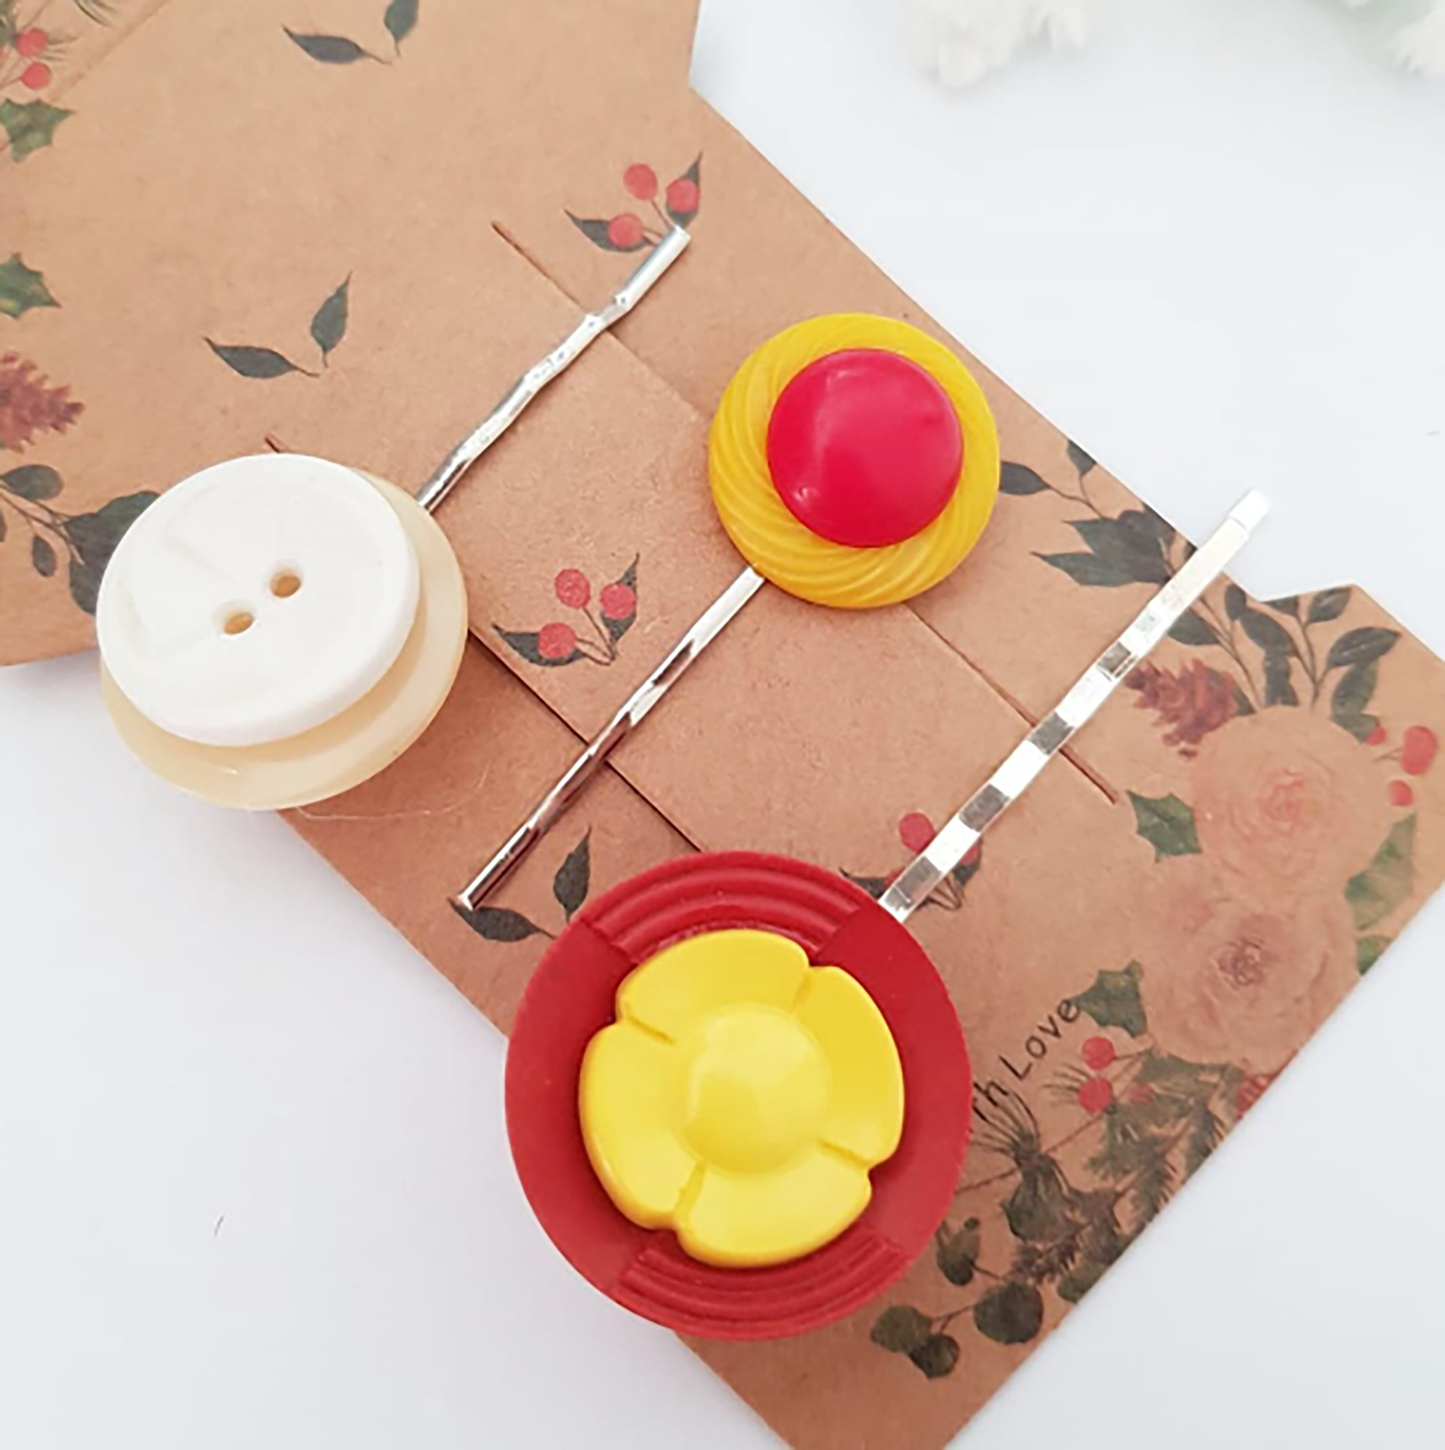 "Elevate your hairdo with Button Bobby Pins! Handcrafted from repurposed vintage buttons, these pins offer a chic and eco-friendly way to style your hair."